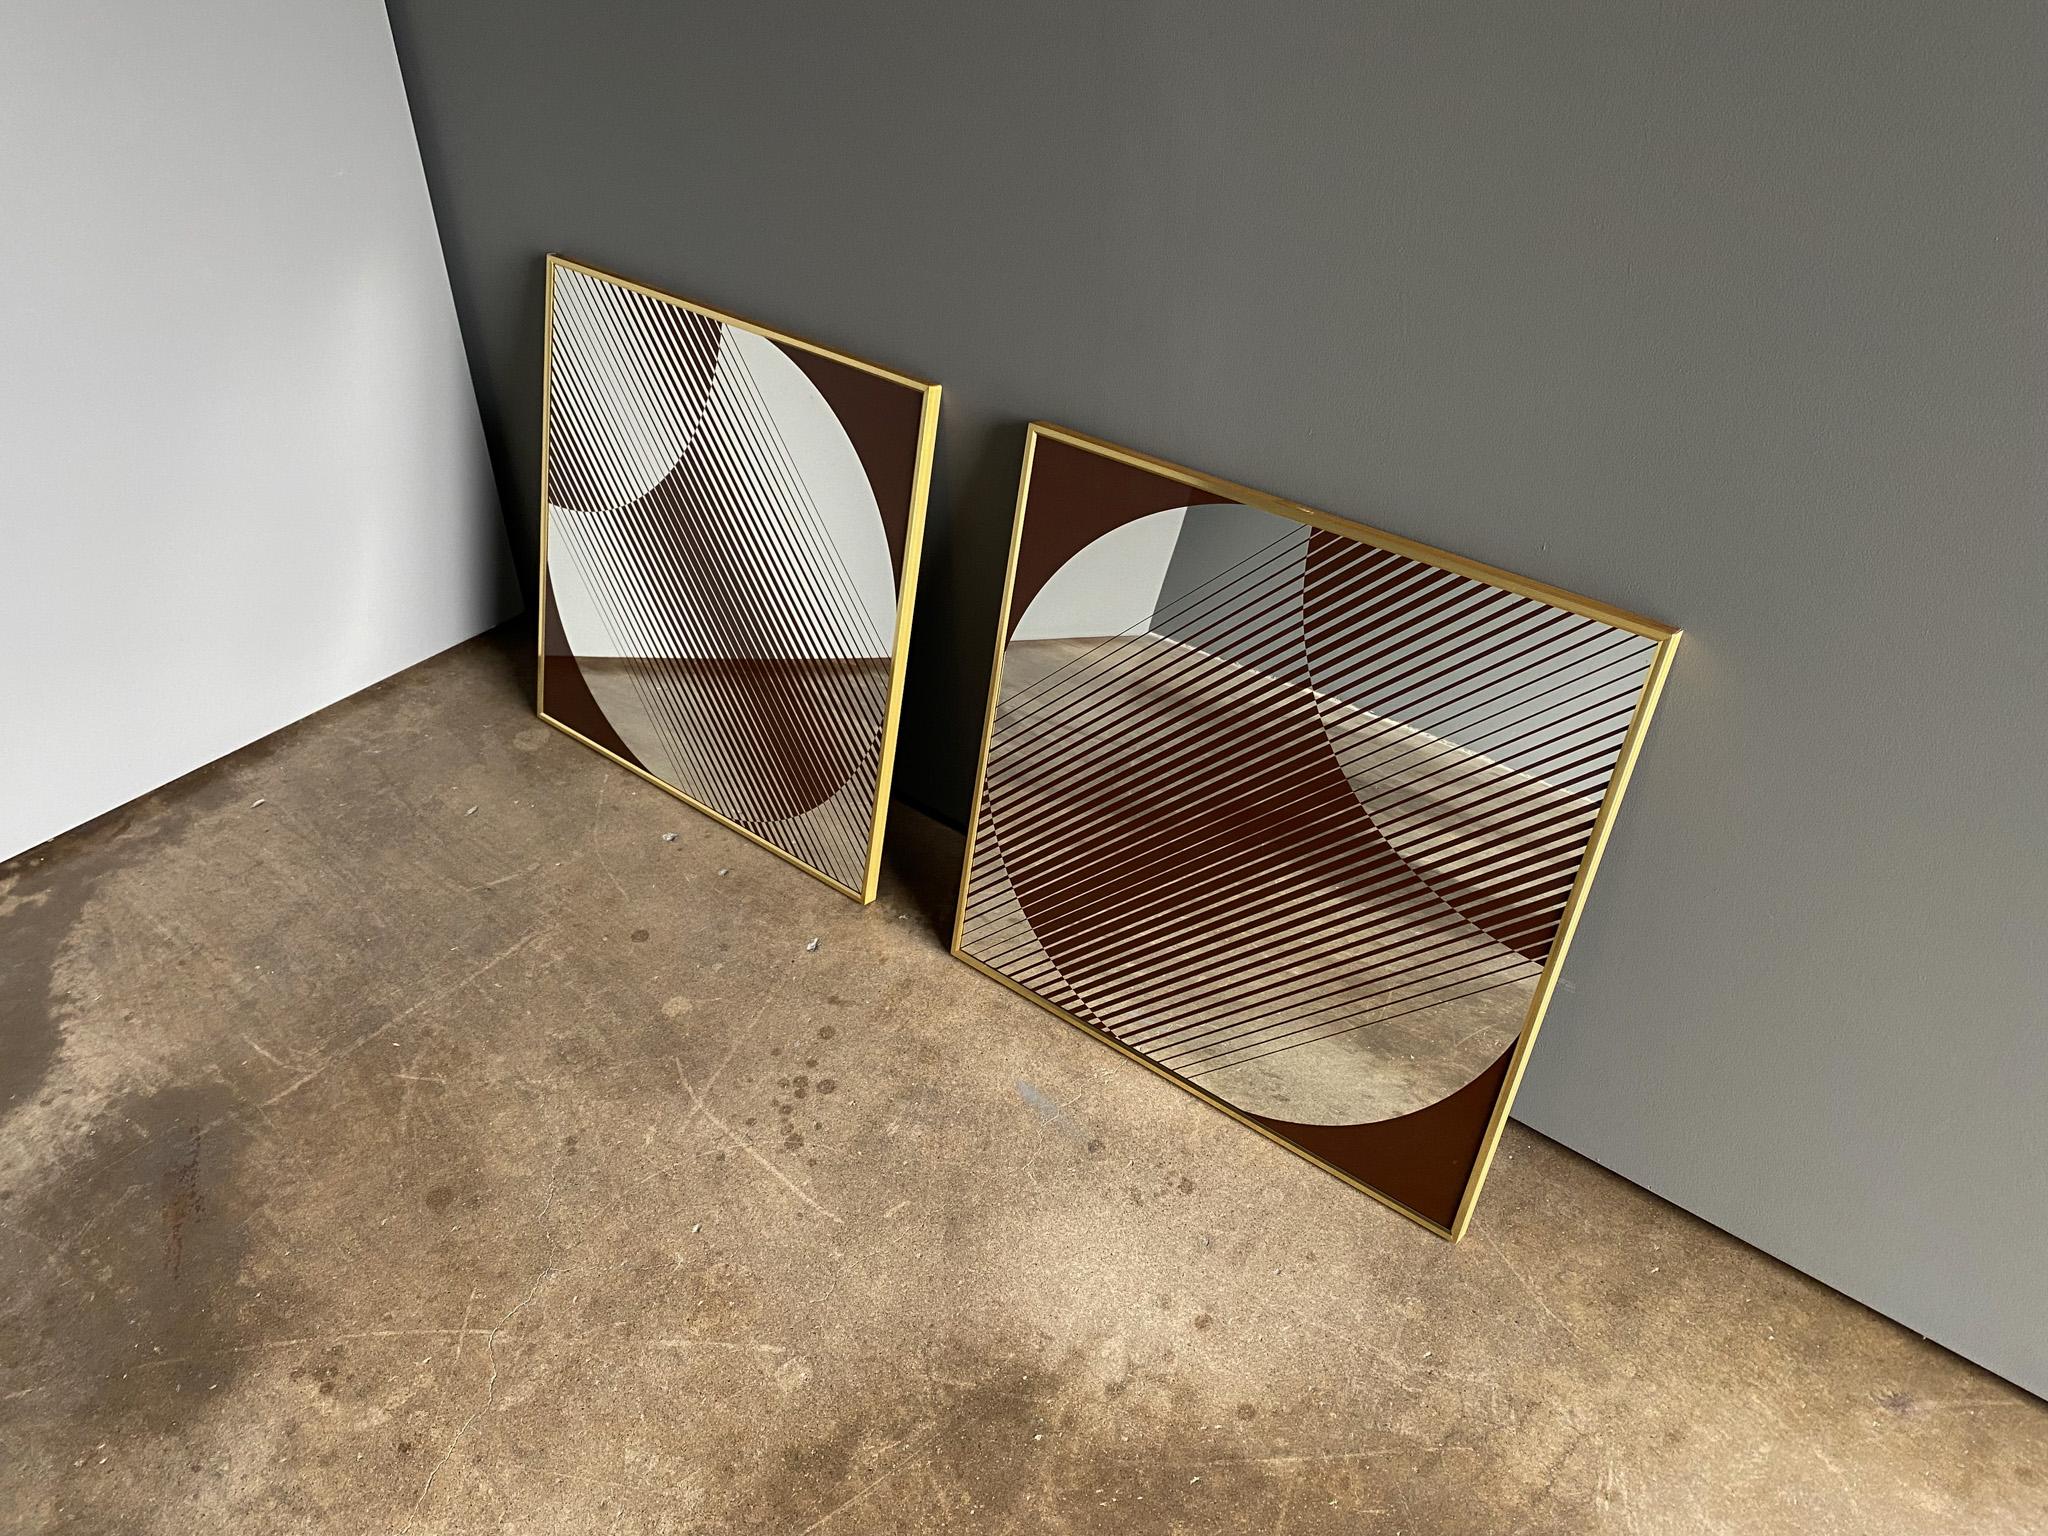 Turner Op Art Abstract Wall Mirrors, United States, 1970's  1